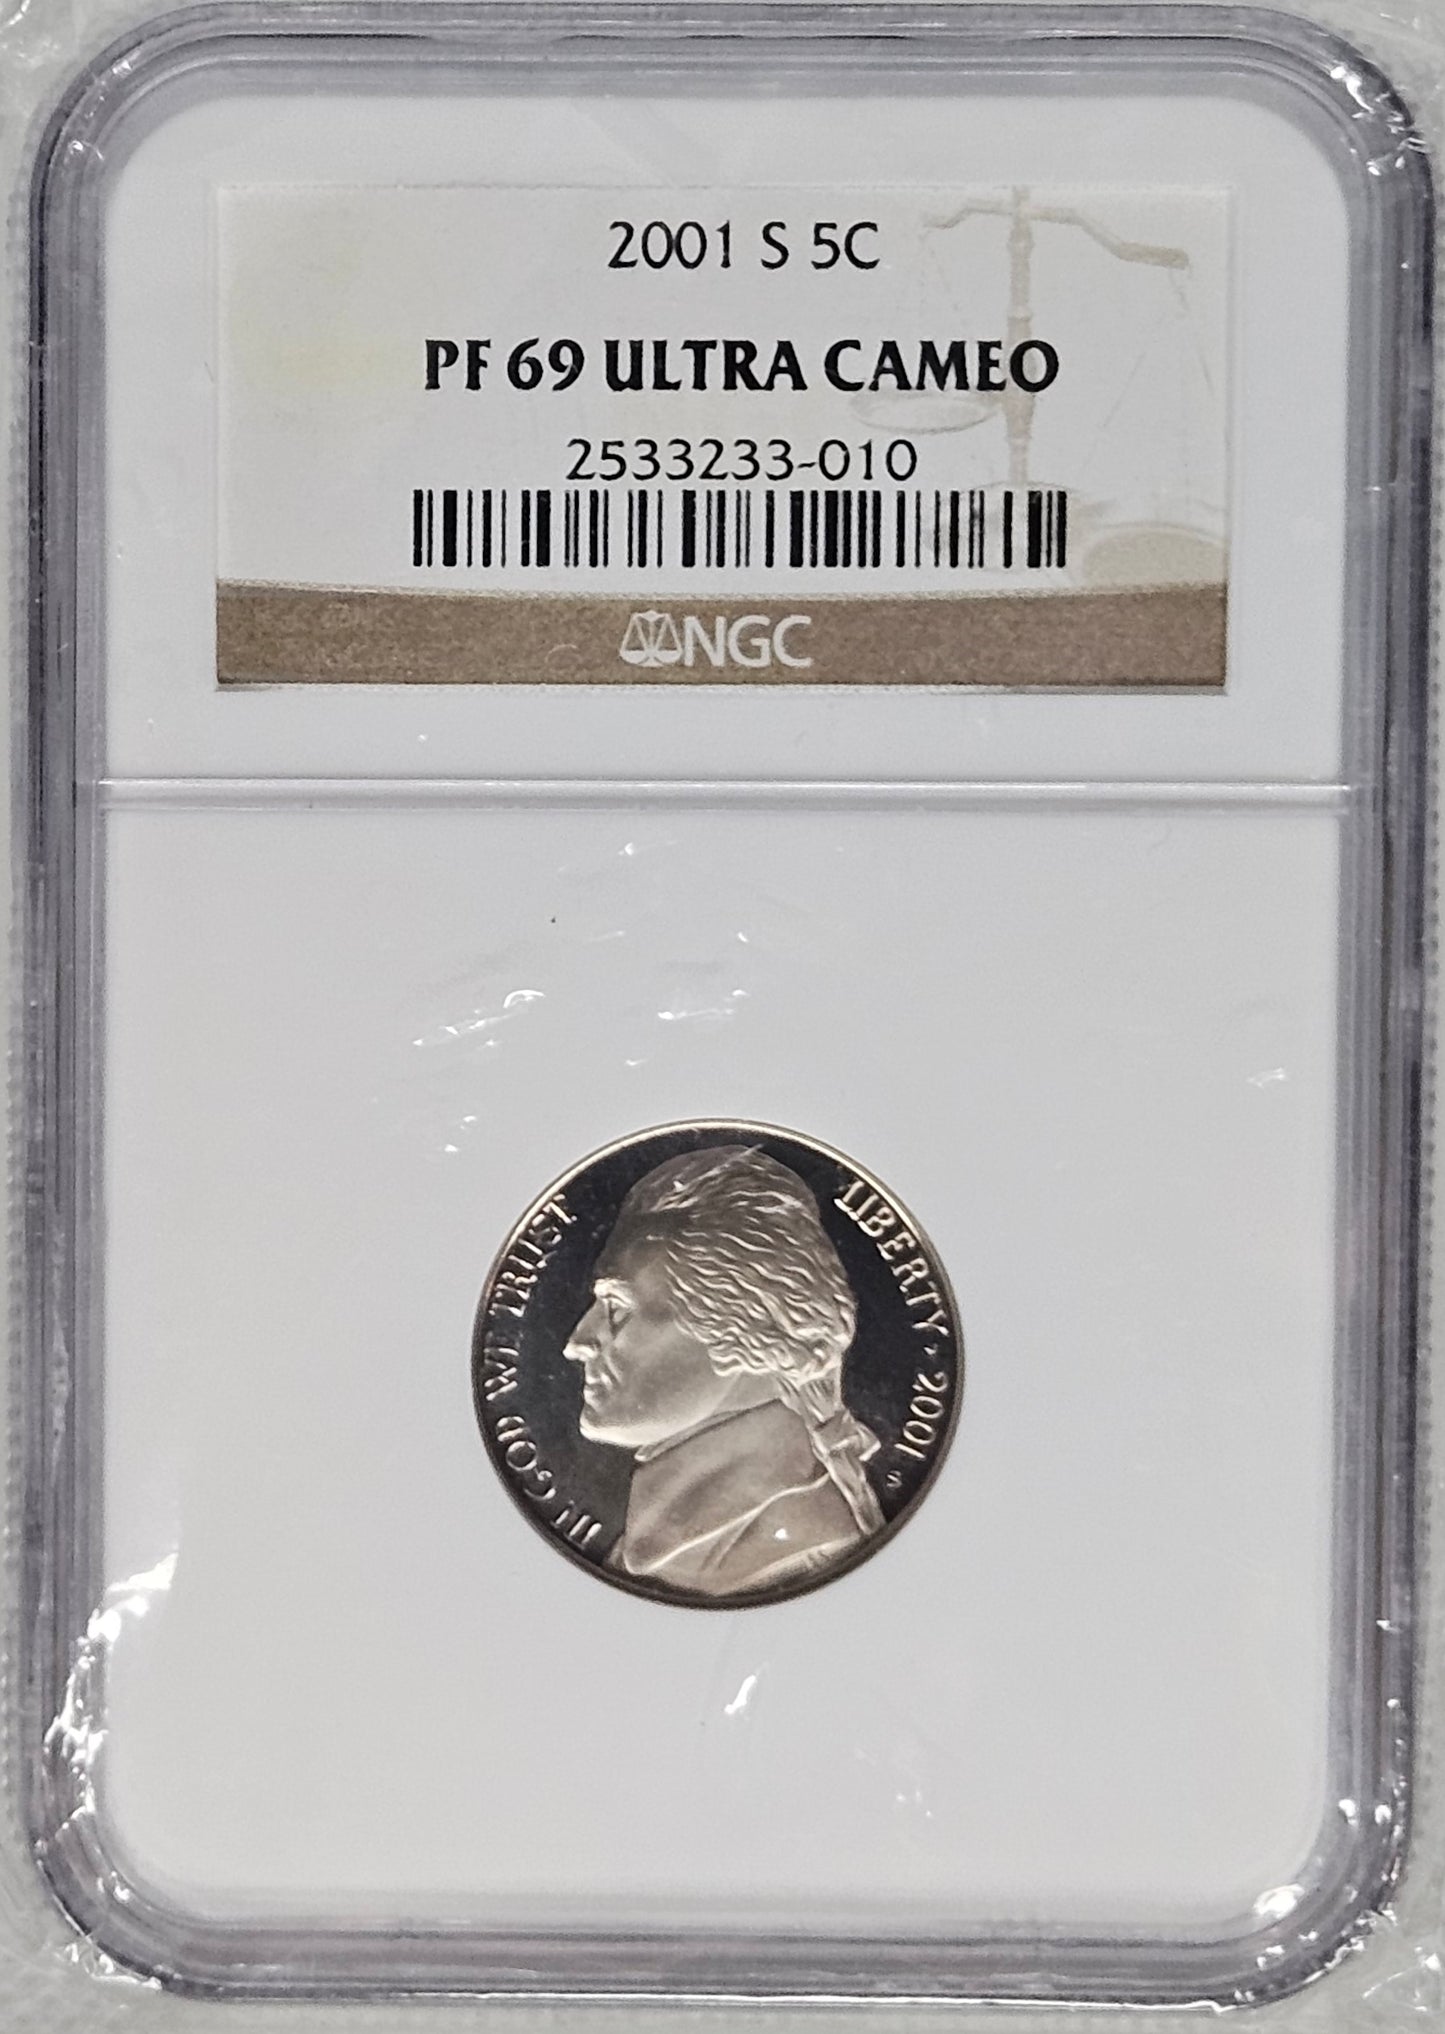 2001-S Jefferson Nickel NGC PF69 Ultra Cameo Amazing Graded Proof Coin!!!